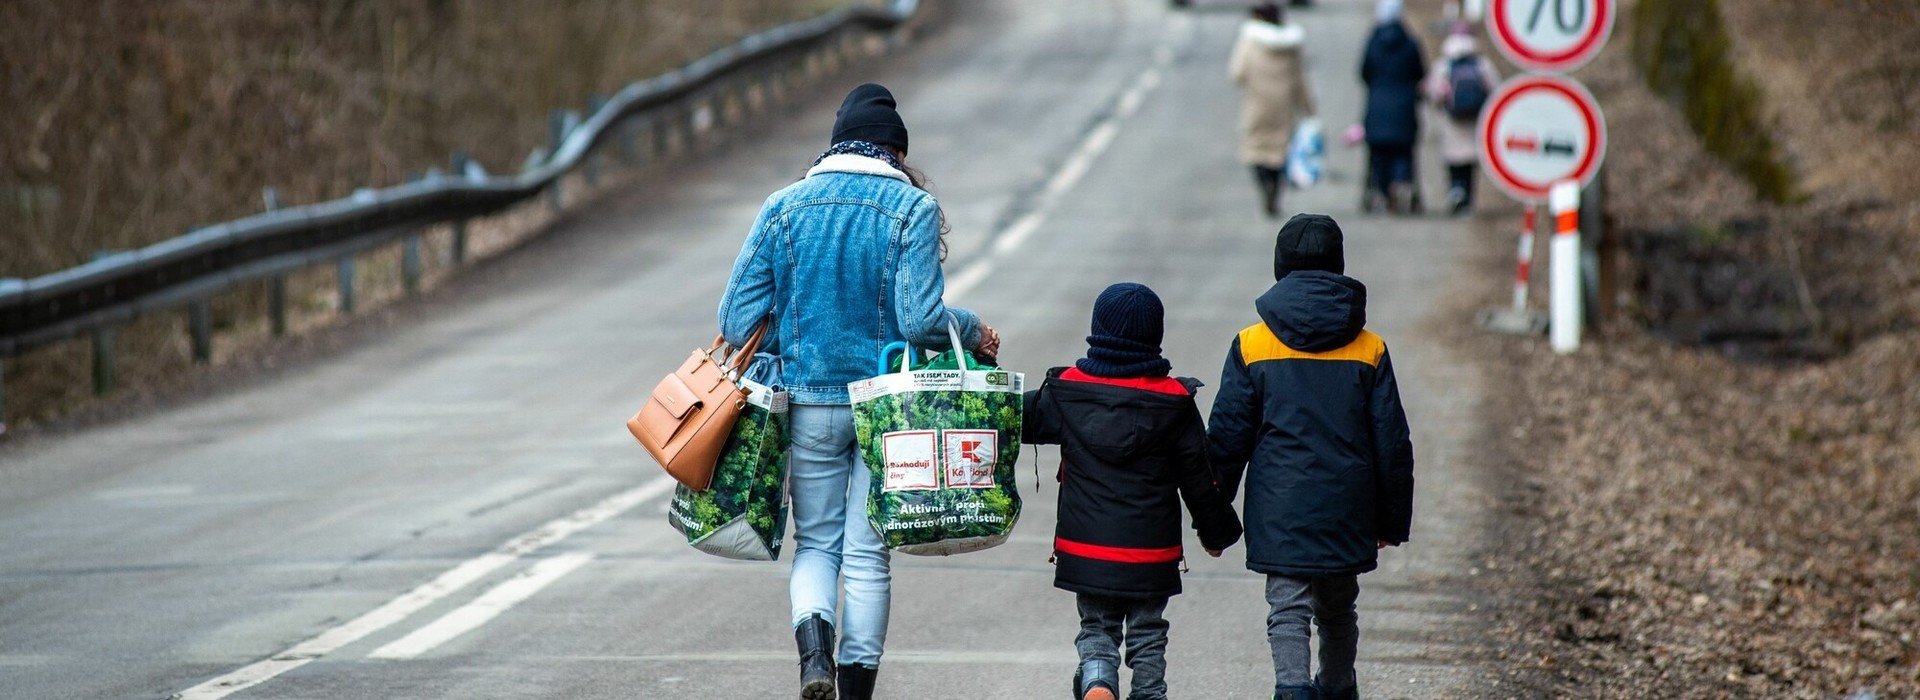 A mother and her two children carrying bags and walking on a road.